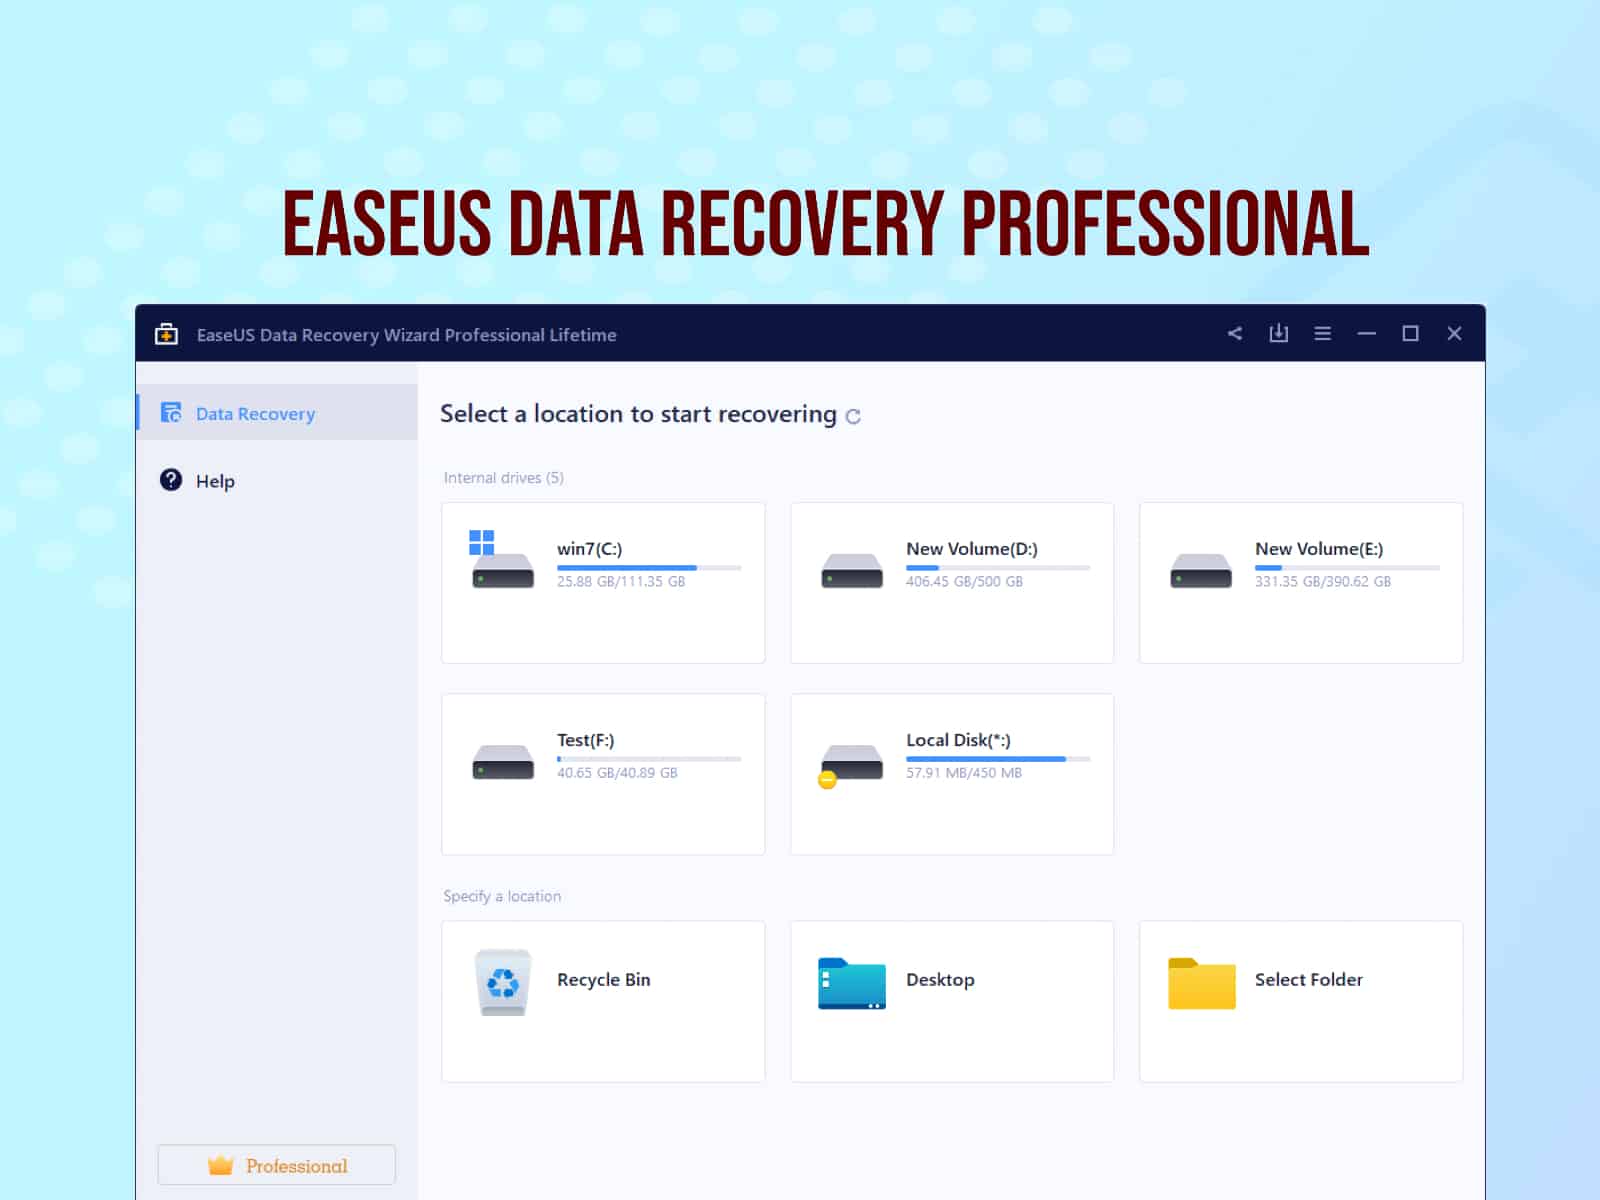 easeus data recovery software